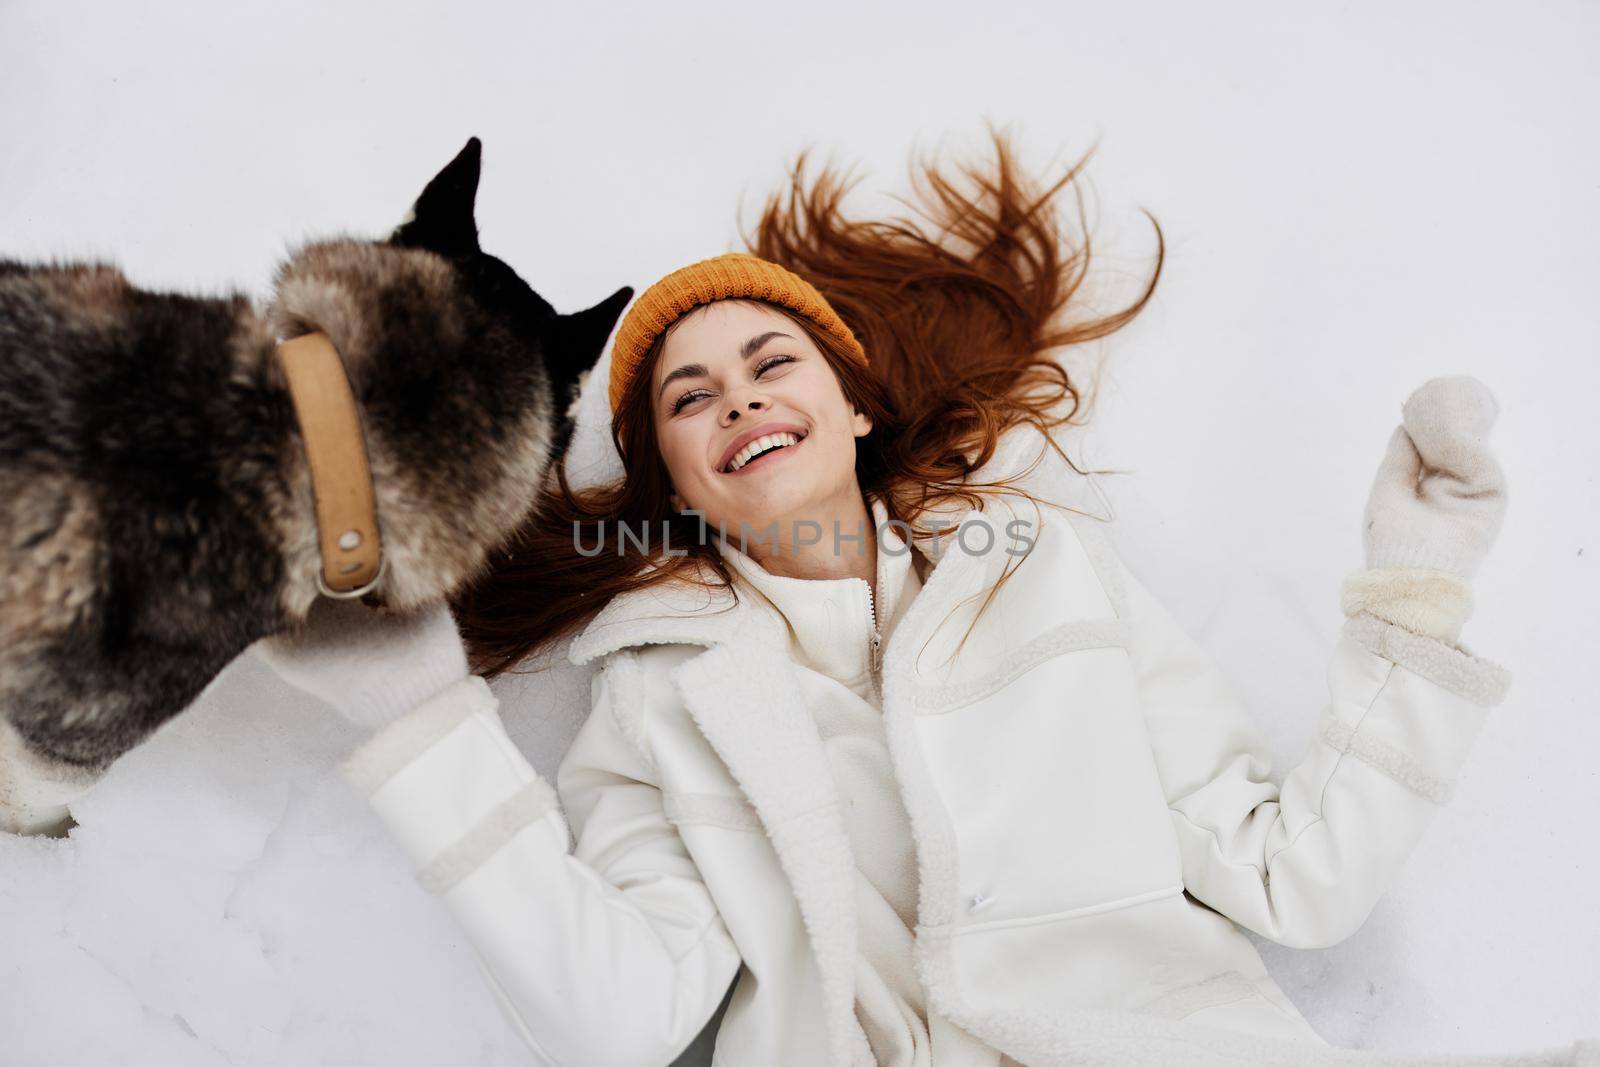 portrait of a woman in the snow playing with a dog fun friendship winter holidays by SHOTPRIME